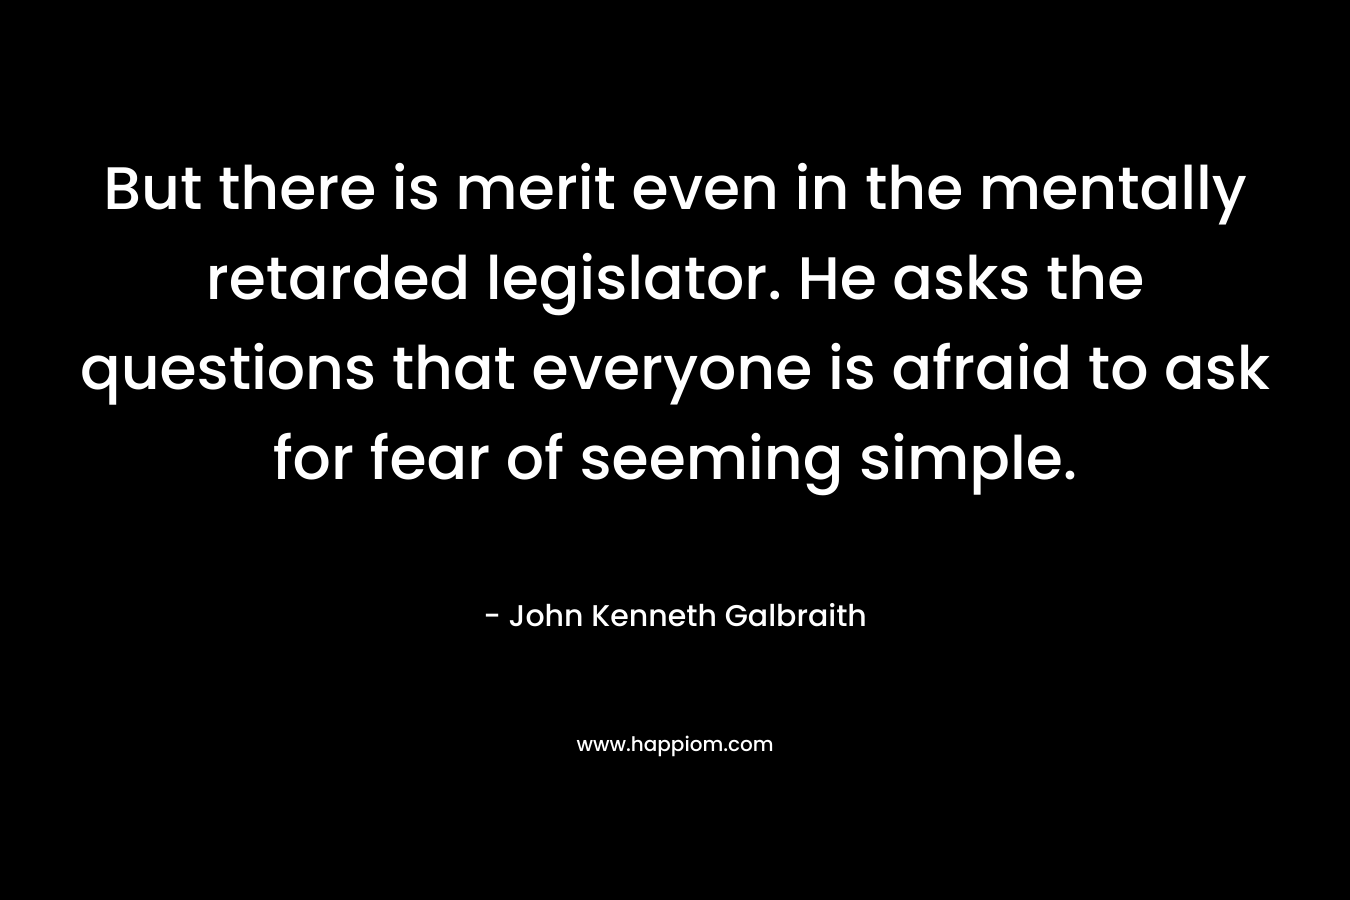 But there is merit even in the mentally retarded legislator. He asks the questions that everyone is afraid to ask for fear of seeming simple. – John Kenneth Galbraith